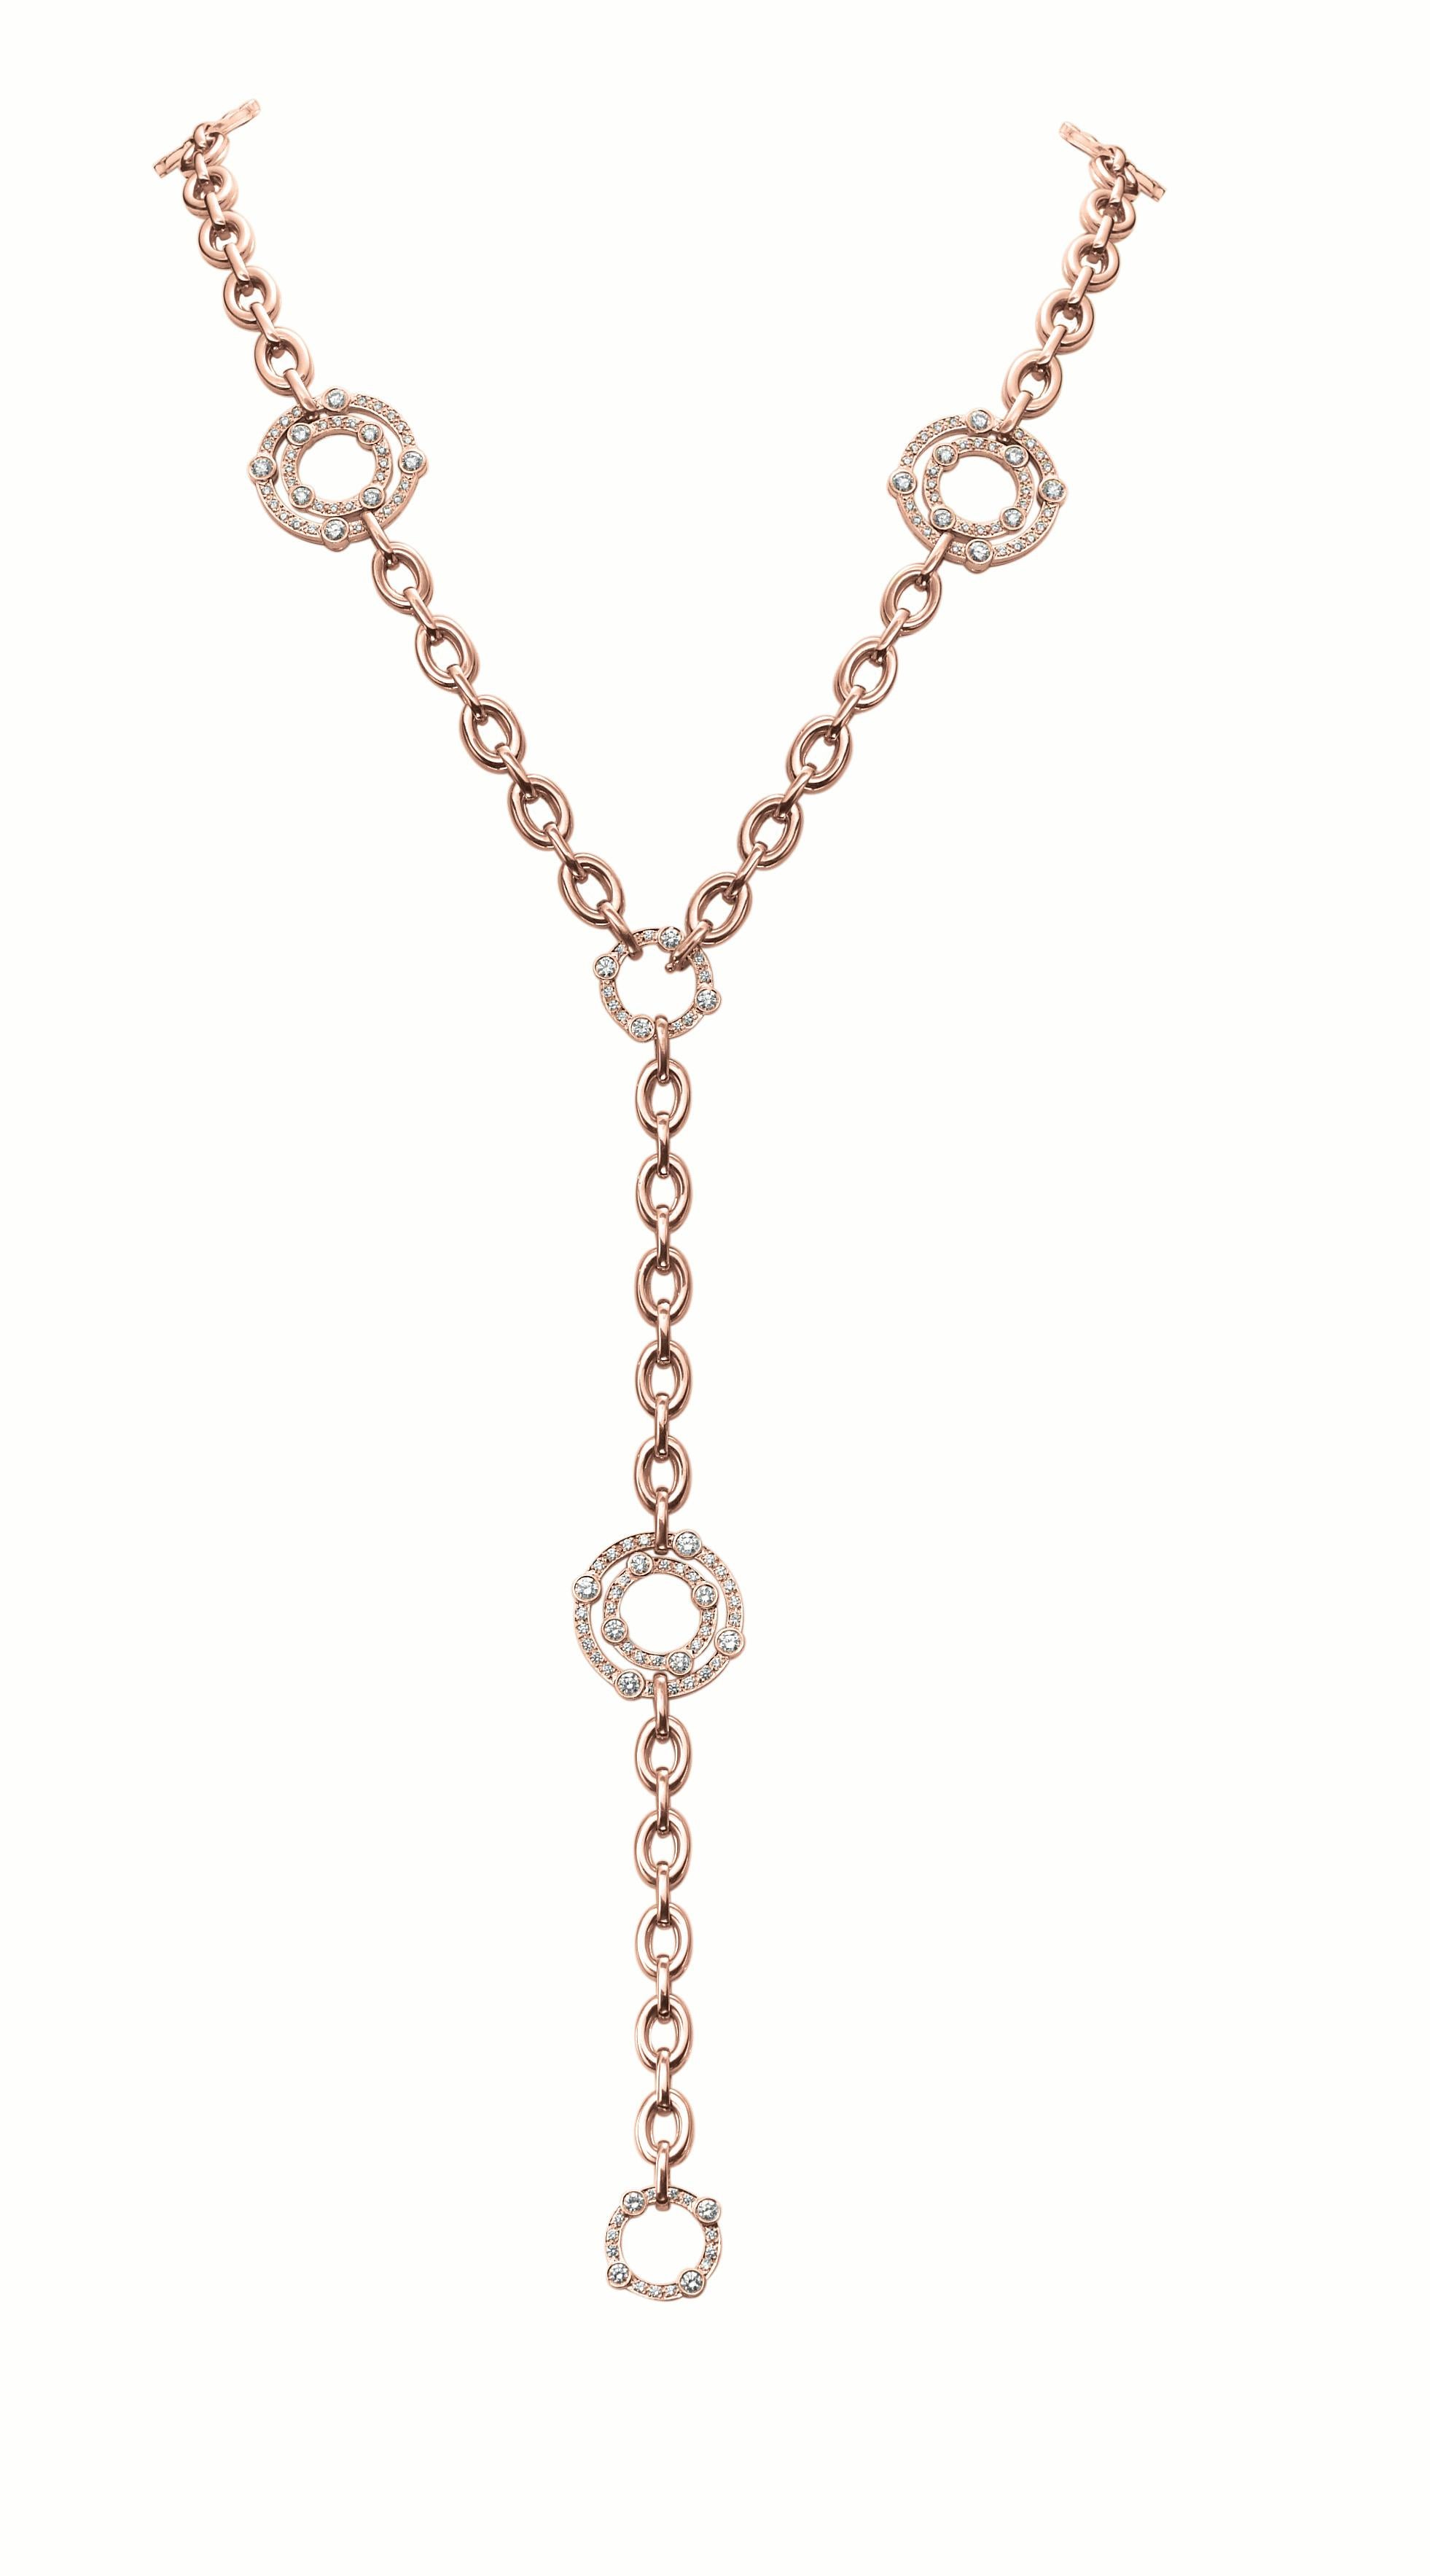 18 karat rose gold Carousel Collection 18 karat round link necklace with interspersed Carousel Collection jubilee motifs with diamond pavé.
220 round brilliant cut diamonds, 6.70 approximate total carat weight.
All diamonds H-I color, SI1 clarity